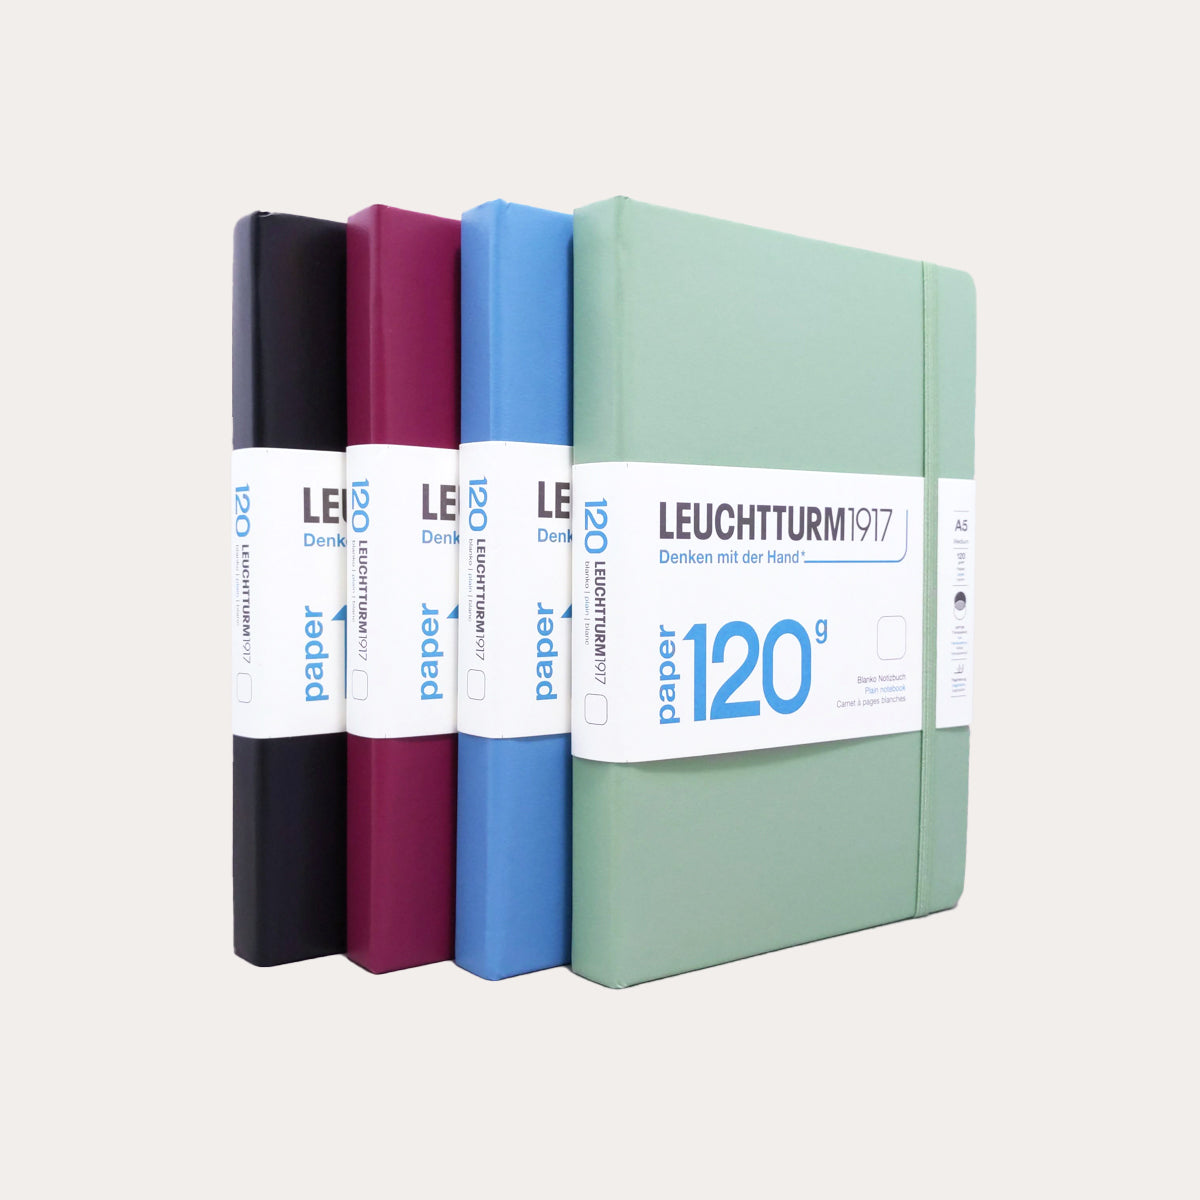 LEUCHTTURM1917 - 120G Special Edition - Medium A5 Dotted Hardcover Notebook  (Sage) - 203 Numbered Pages with 120gsm Paper